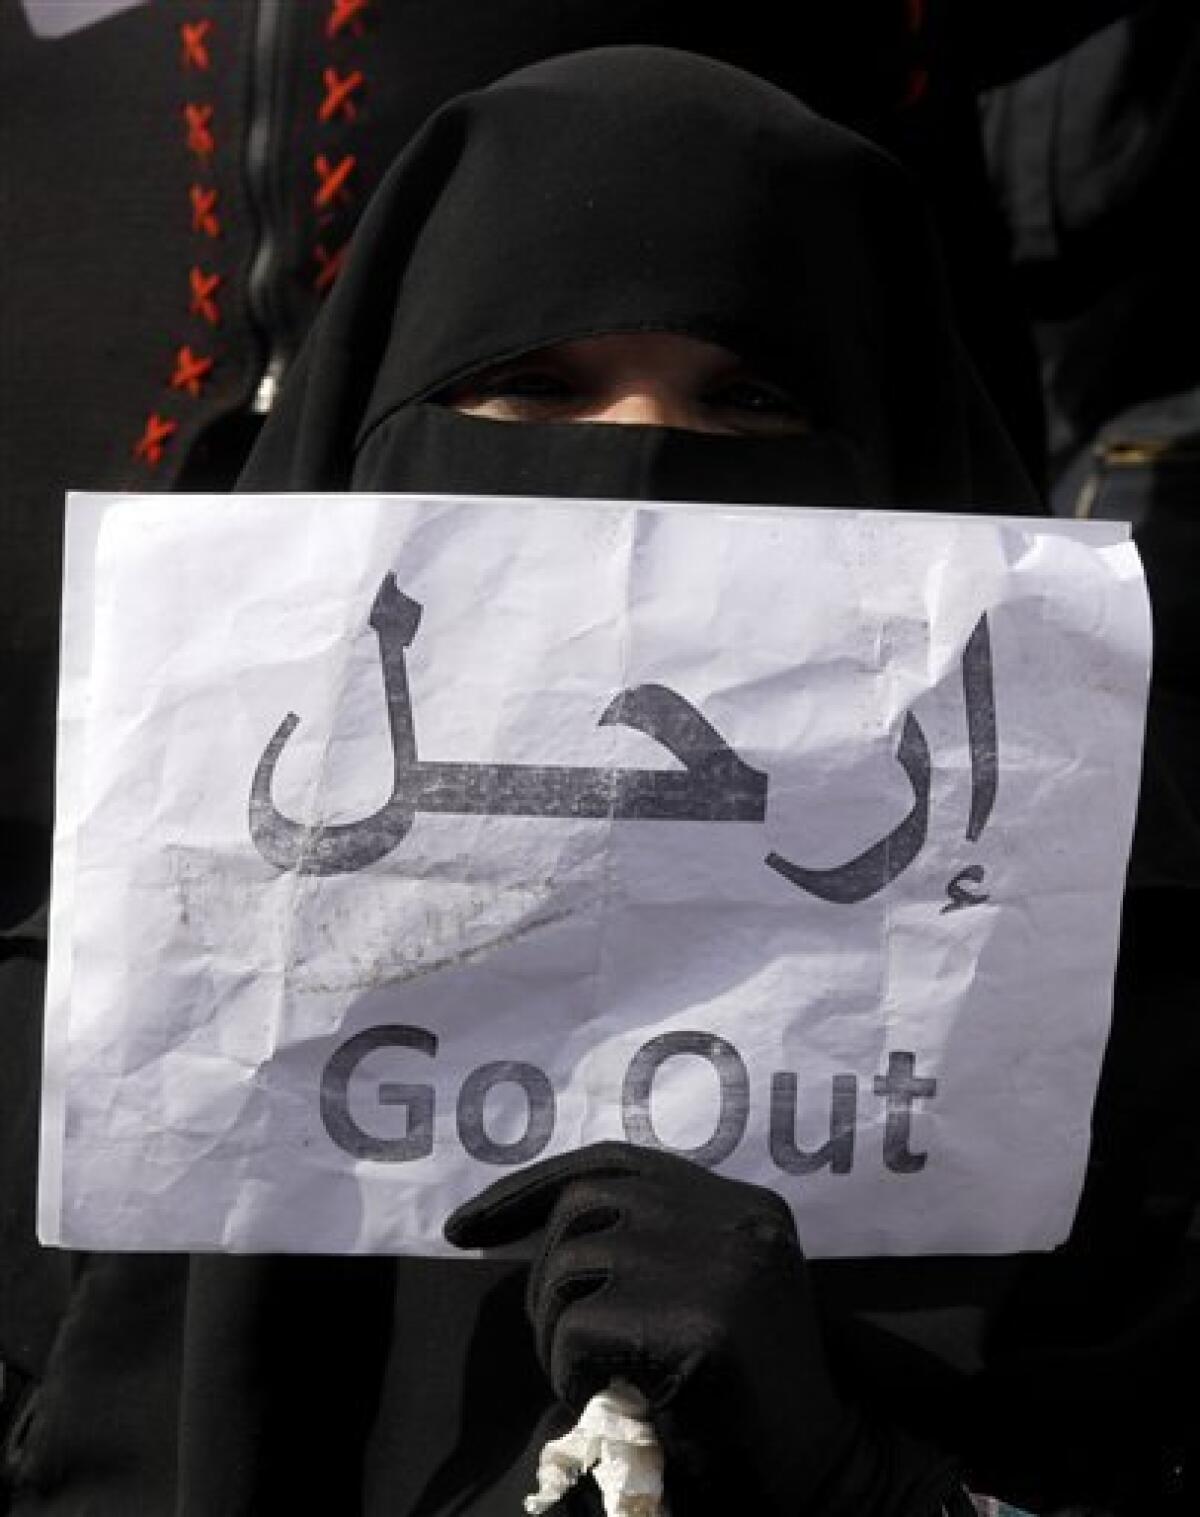 A veiled woman holds a poster calling for President Hosni Mubarak to go, in Tahrir, or Liberation, Square in Cairo, Egypt, Tuesday, Feb. 1, 2011. Tens of thousands of people flooded into the heart of Cairo Tuesday, filling the city's main square as a call for a million protesters was answered by the largest demonstration in a week of unceasing demands for President Hosni Mubarak to leave after nearly 30 years in power. (AP Photo/Victoria Hazou)